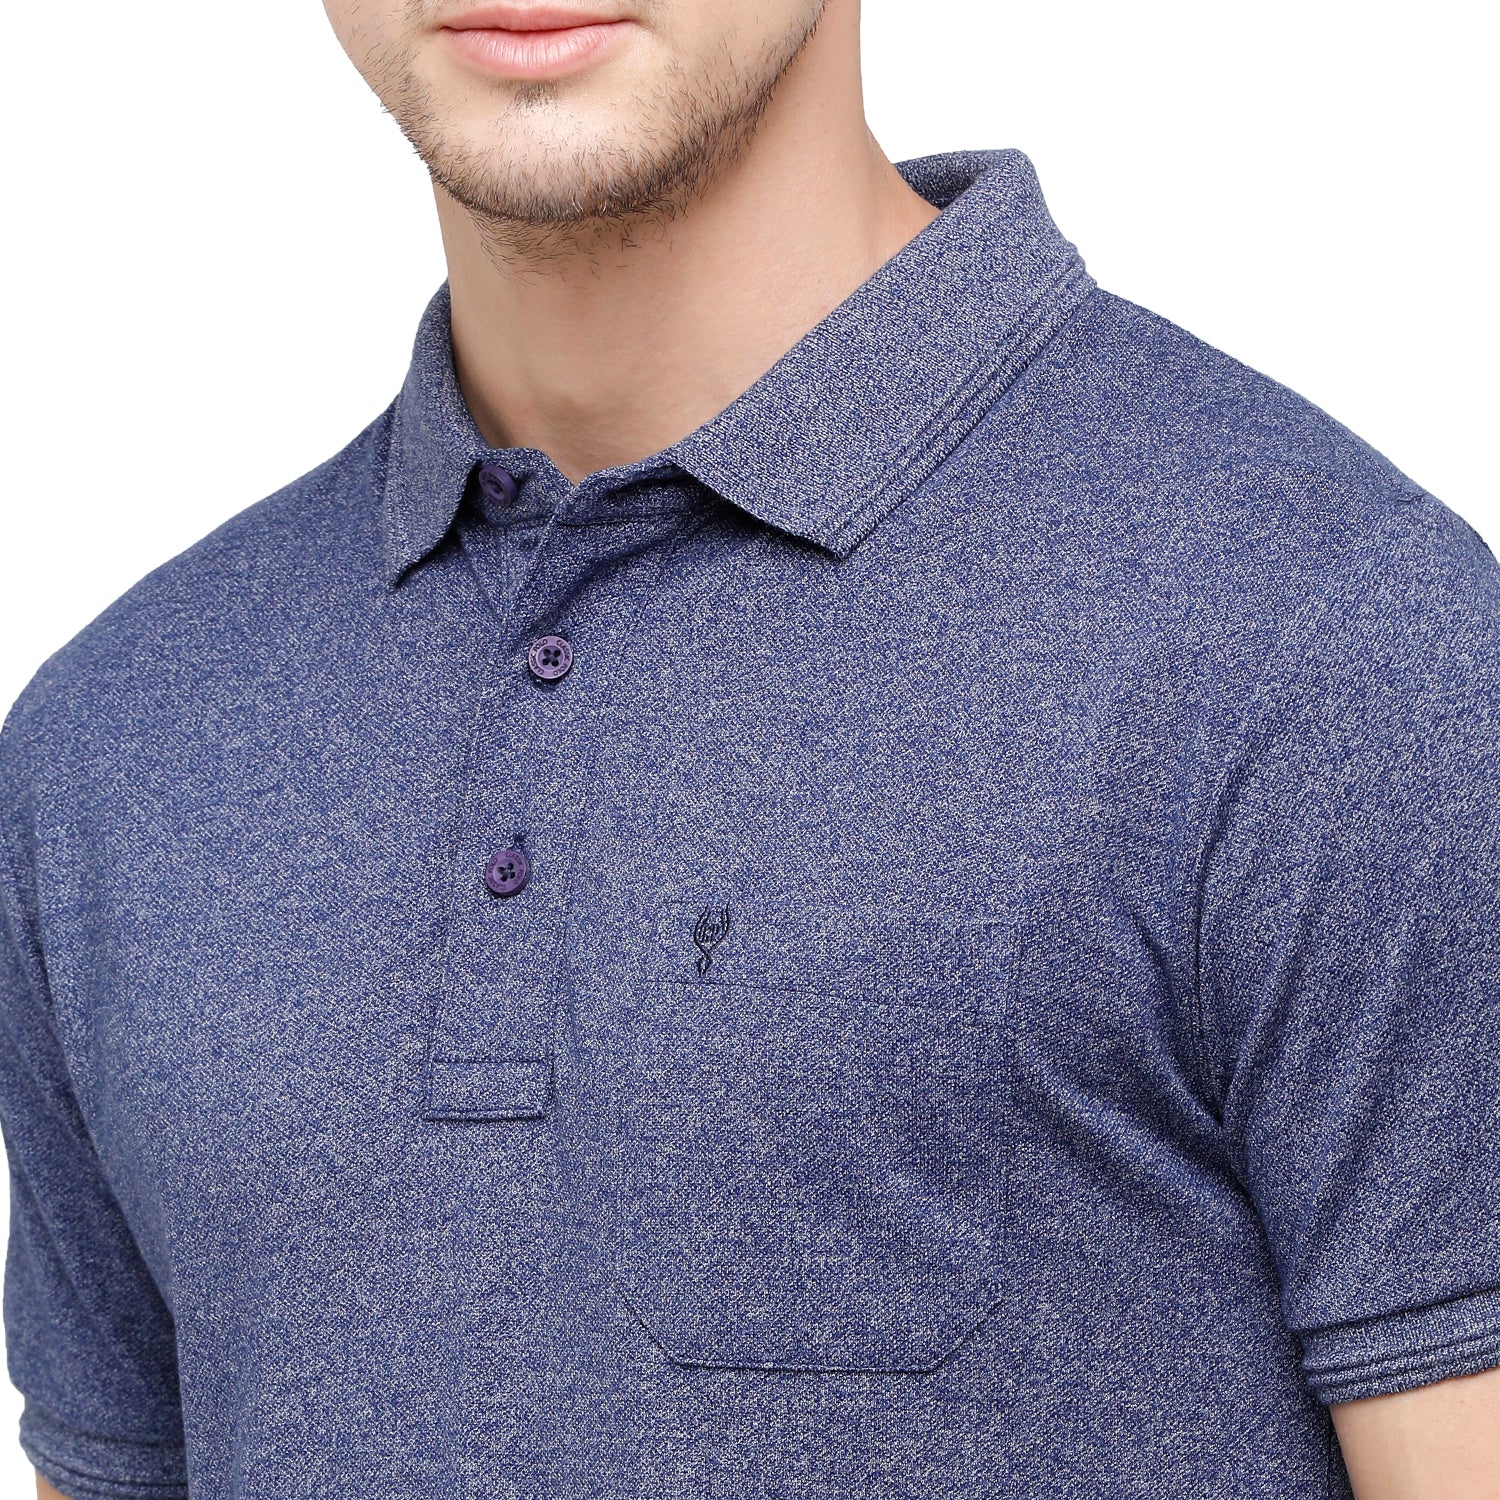 Classic Polo Men's Navy Trendy Grindle Polo Half Sleeve Slim Fit T-Shirt | Proten - Navy